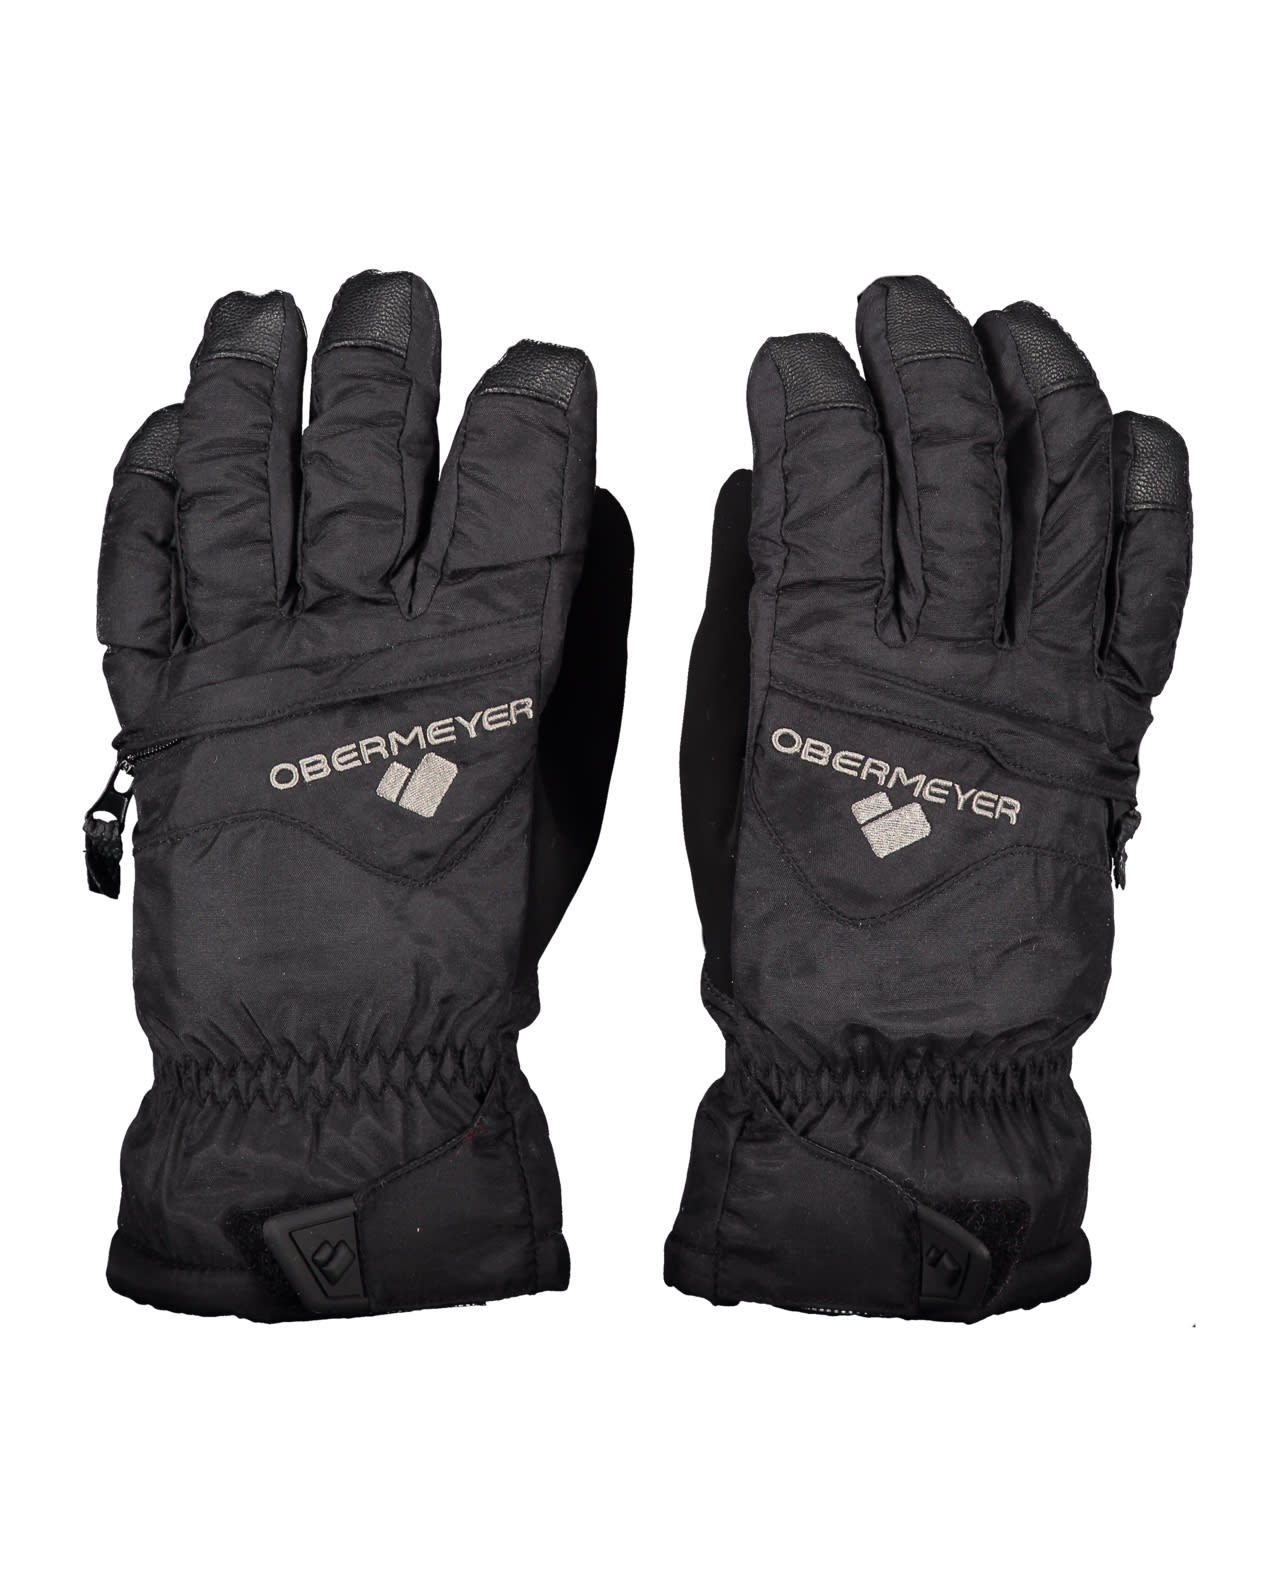 Hot Sell Obermeyer Lava Gloves Cheap On discount | Free Shipping